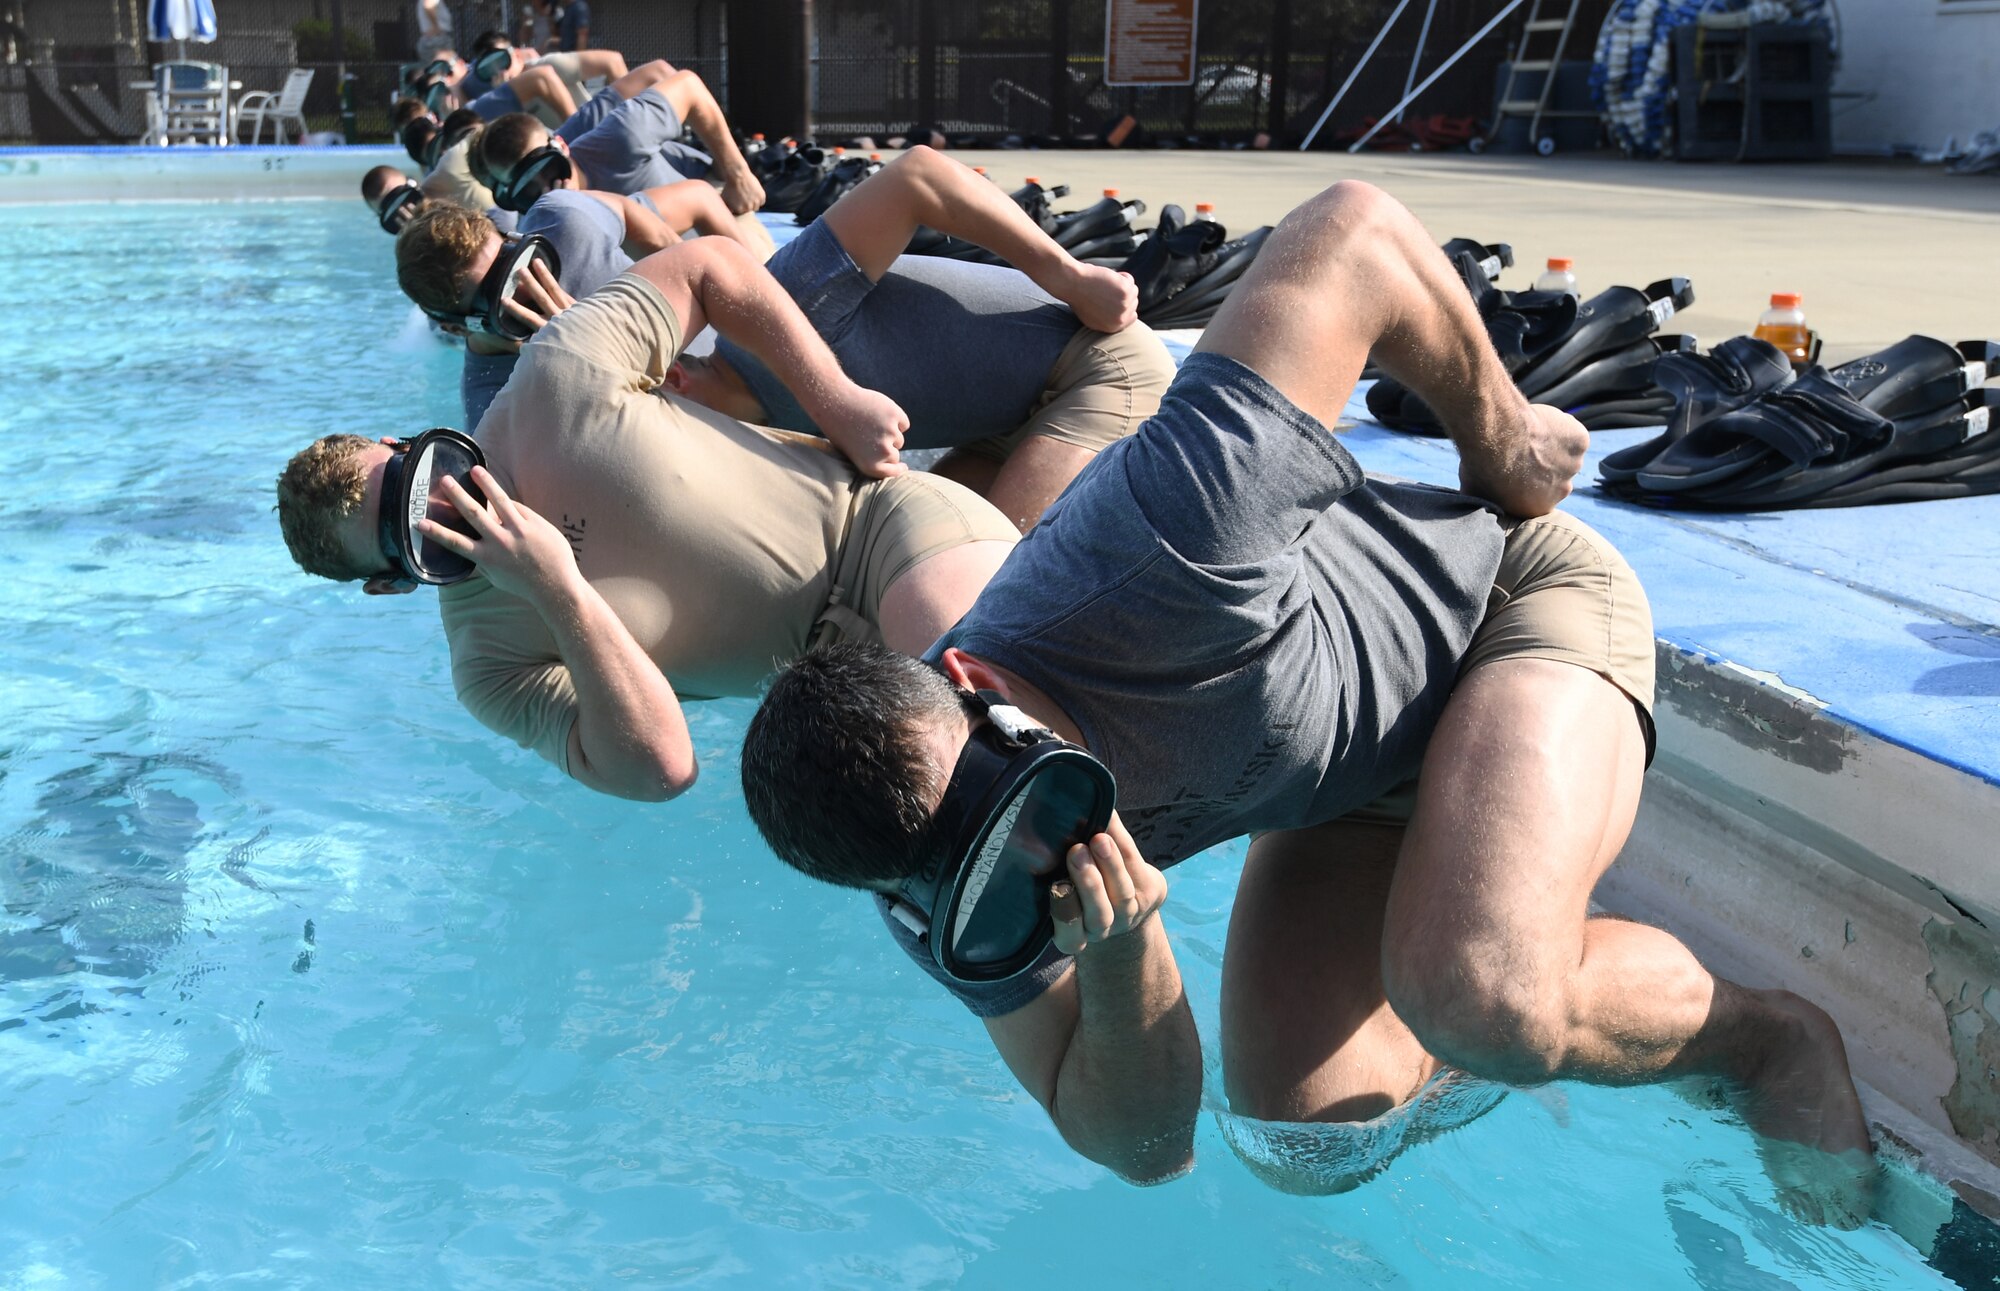 Special warfare trainees dive into a pool